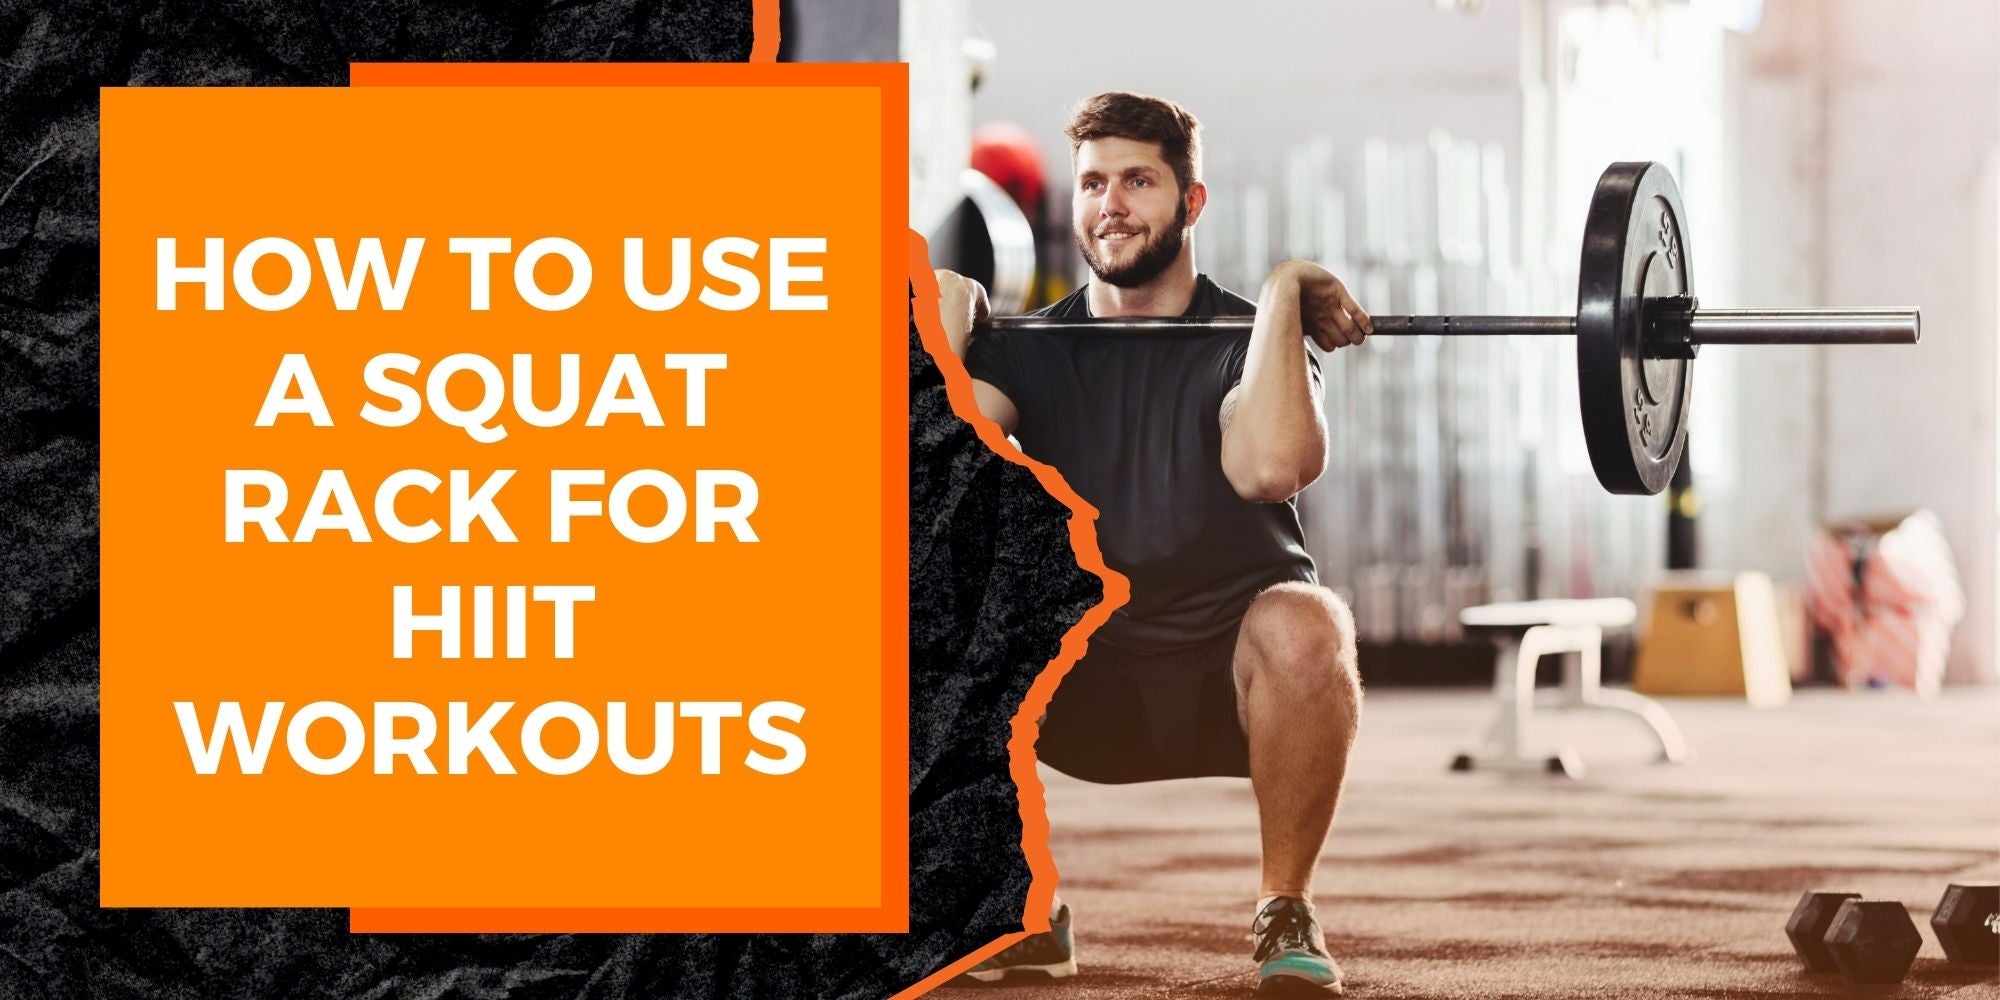 How to Use a Squat Rack for HIIT Workouts